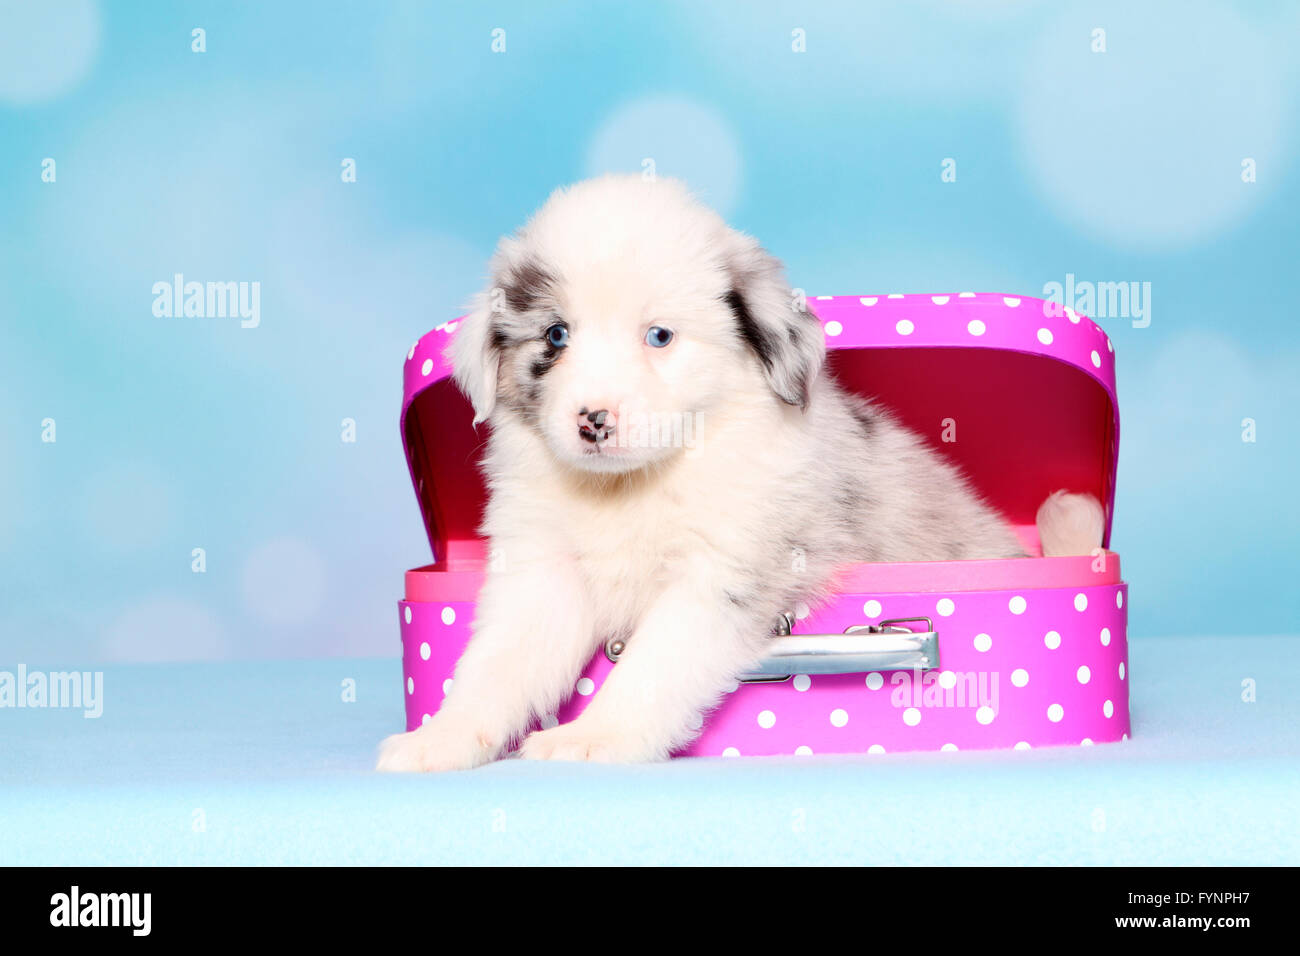 Miniature American Shepherd. Puppy (6 weeks old) sitting in a pink suitcase with white polka dots. Studio picture against a blue background. Germany Stock Photo